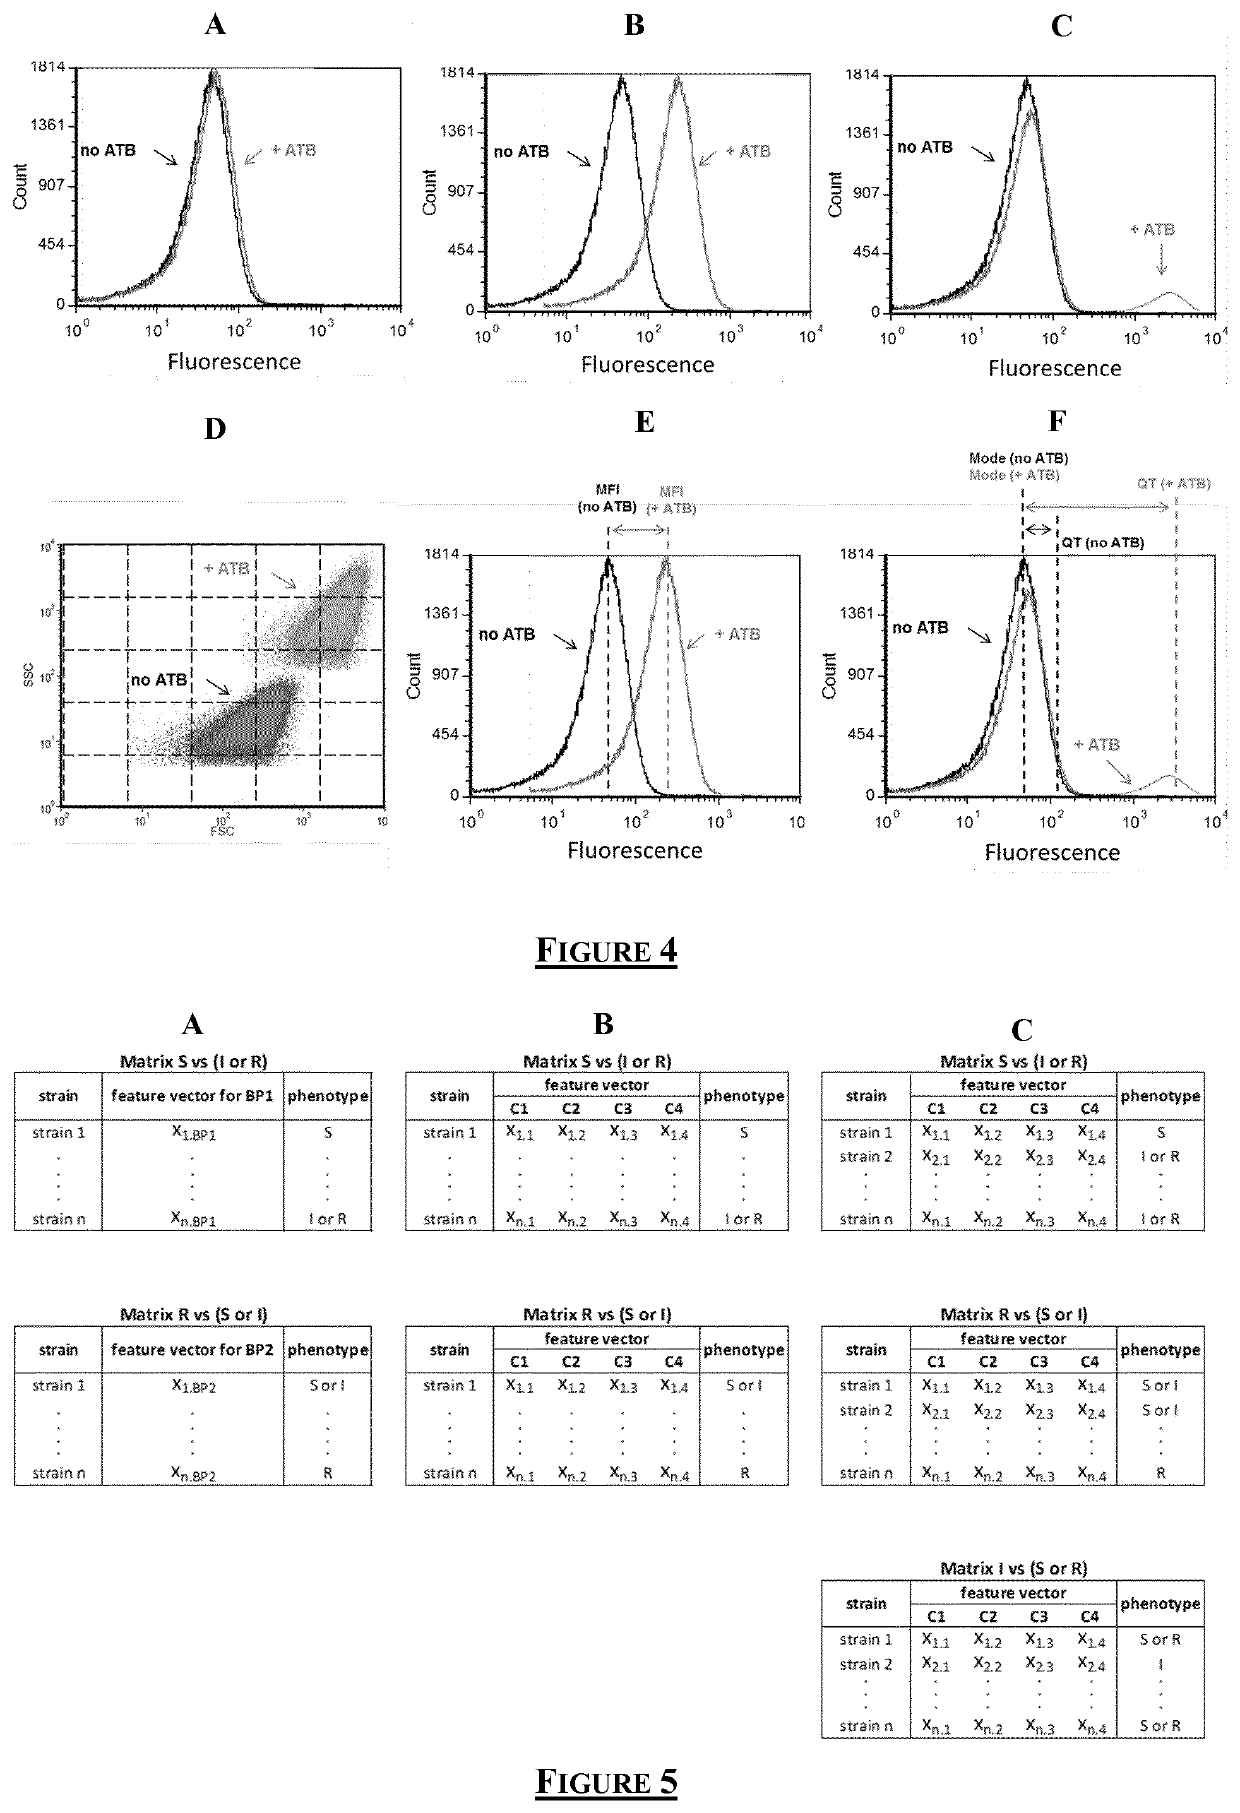 Flow cytometry data processing for antimicrobial agent sensibility prediction